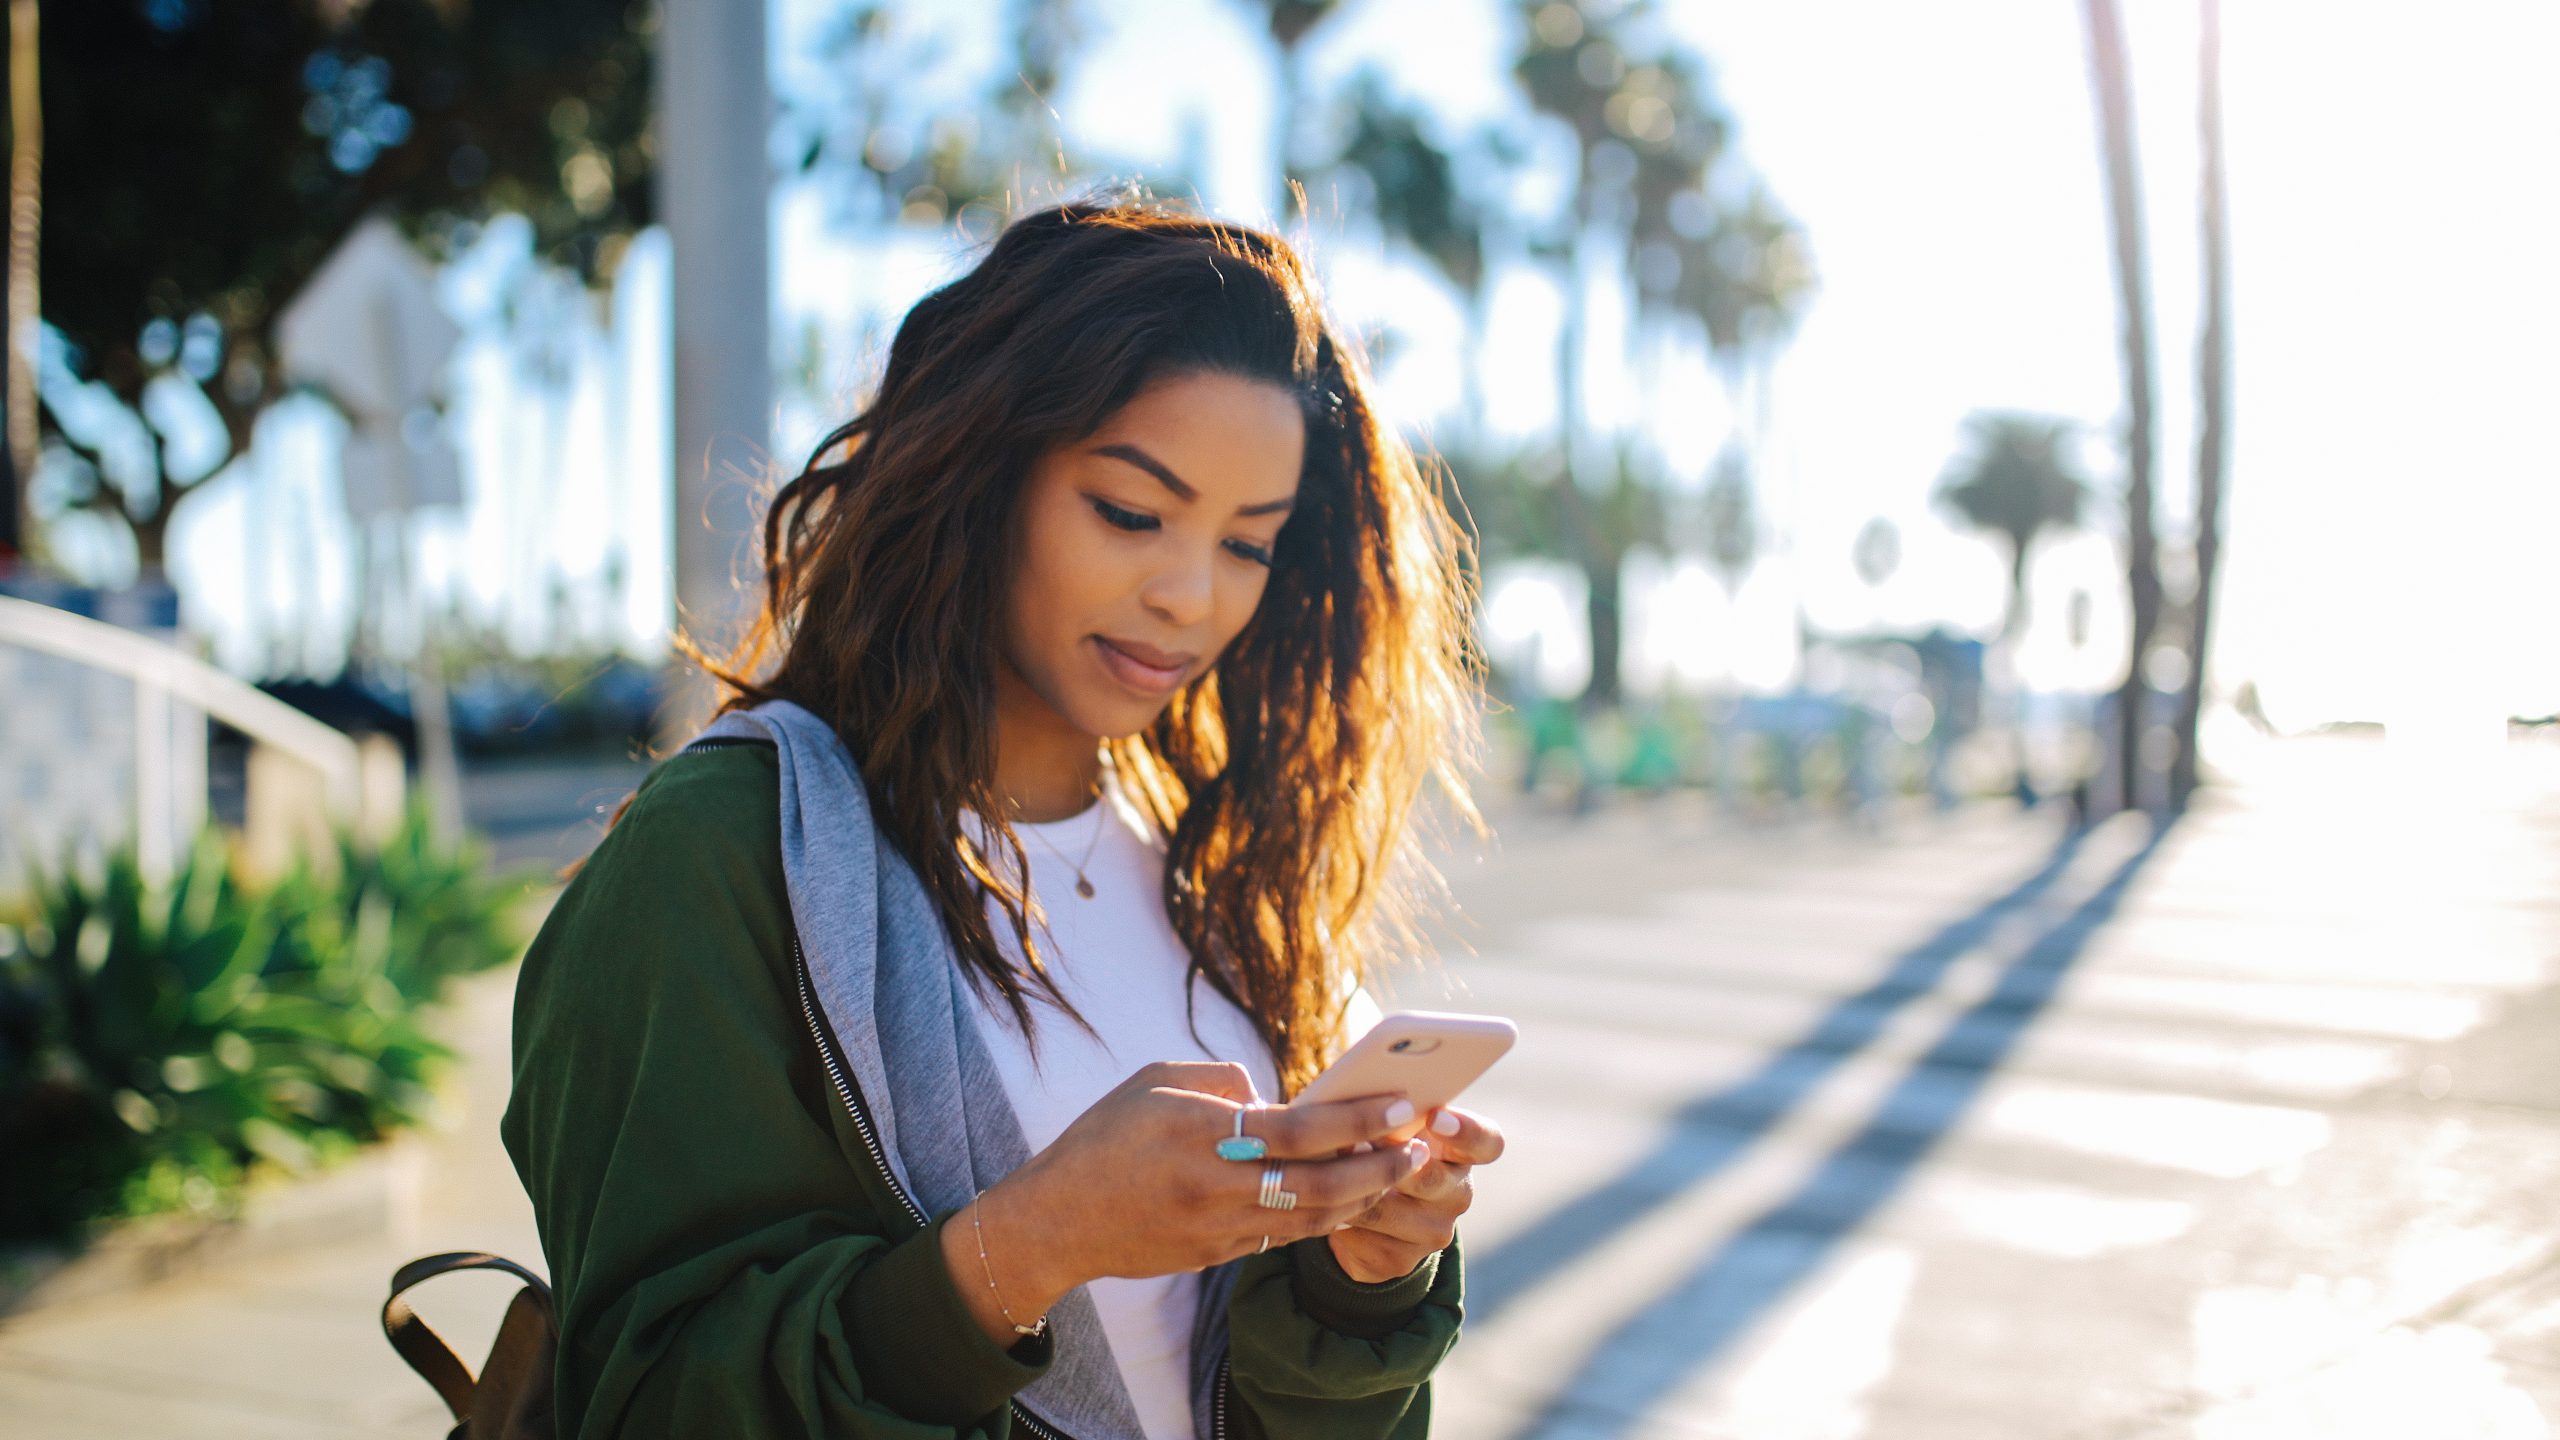 An image of a young fashionable woman reading a message on her phone.